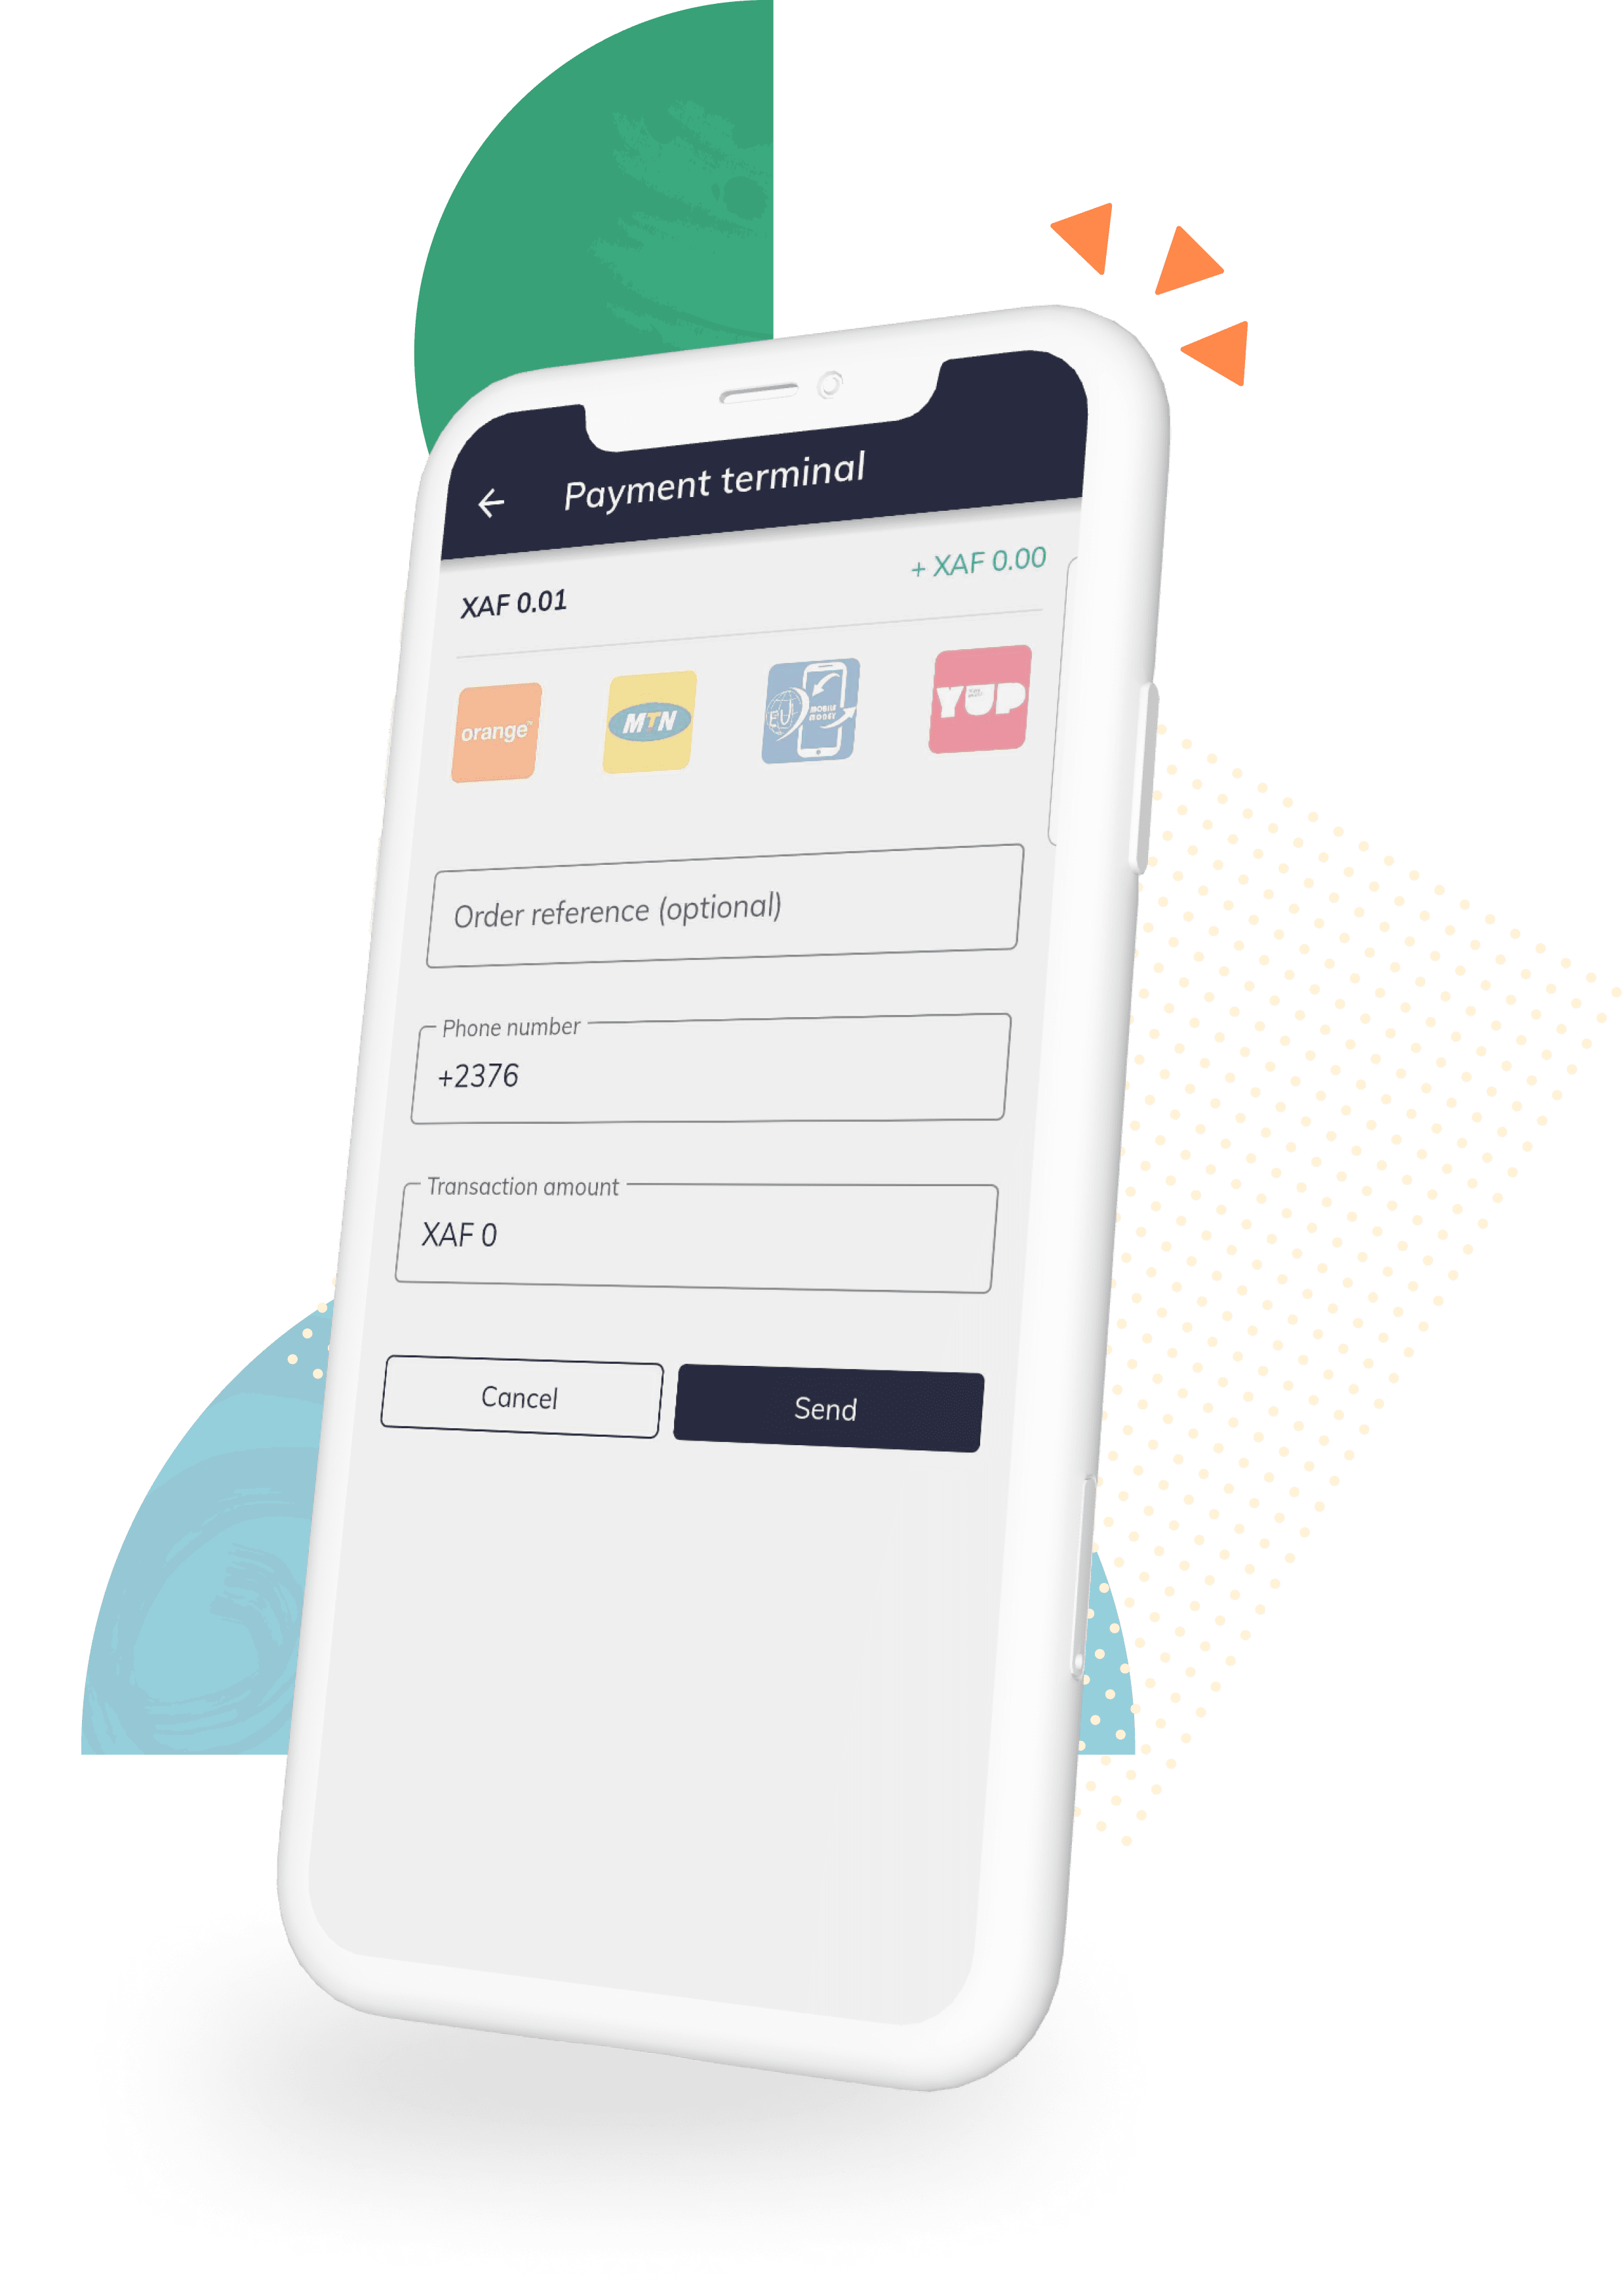 diool app as a mean to accept all types of payments: Orange Money, MTN momo, YUP, Express Union, Visa, Mastercard diool permet d'accepter tout type de paiement : Orange Money, MTN momo, YUP, Express Union, Visa, Mastercard